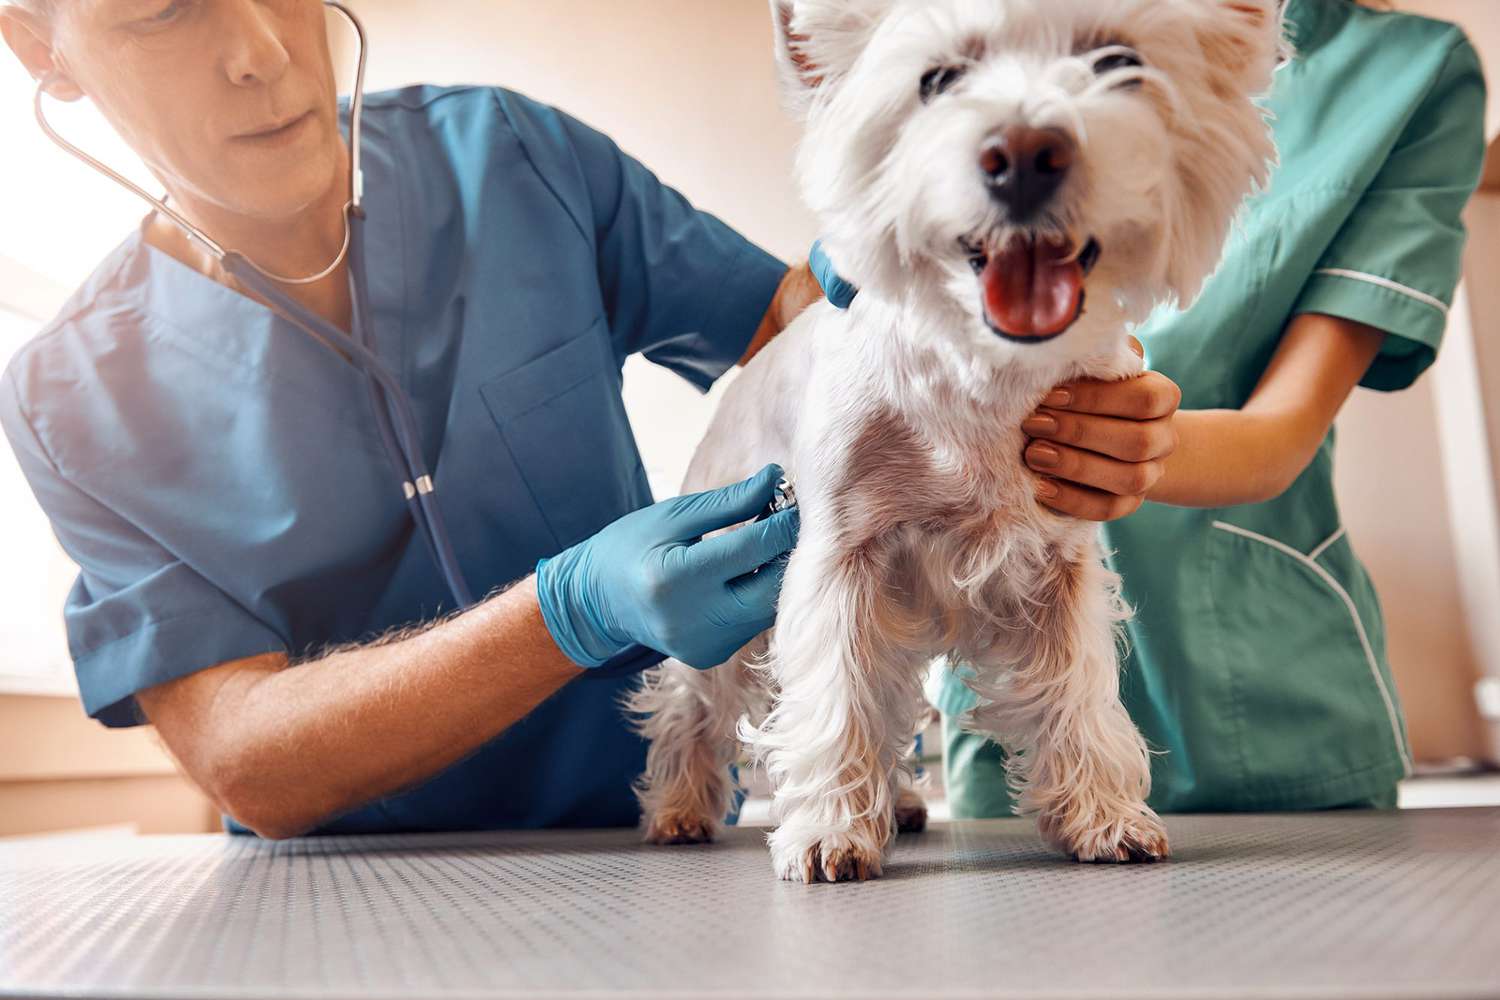 pet tech using a stethoscope on a dog; heart disease in dogs